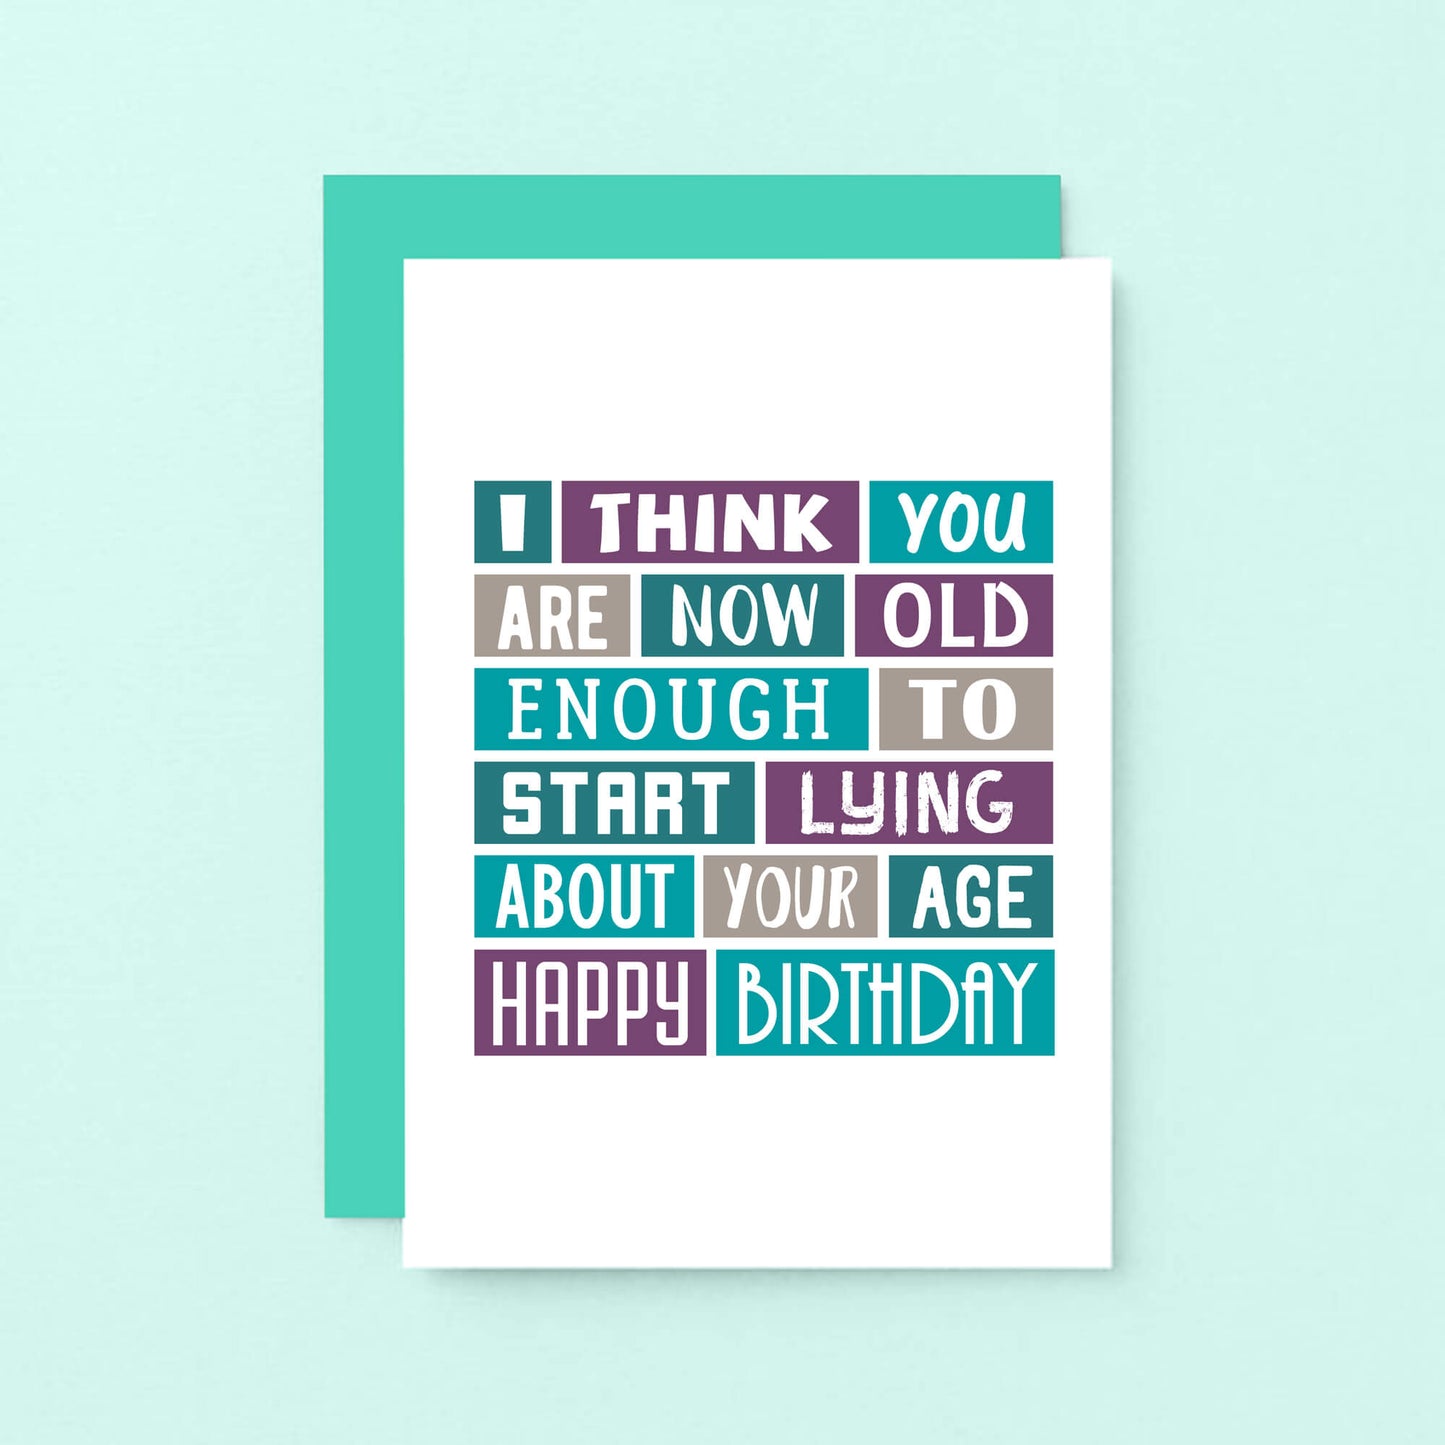 Funny Birthday Card by SixElevenCreations. Reads I think you are now old enough to start lying about your age. Happy birthday. Product Code SE0060A6